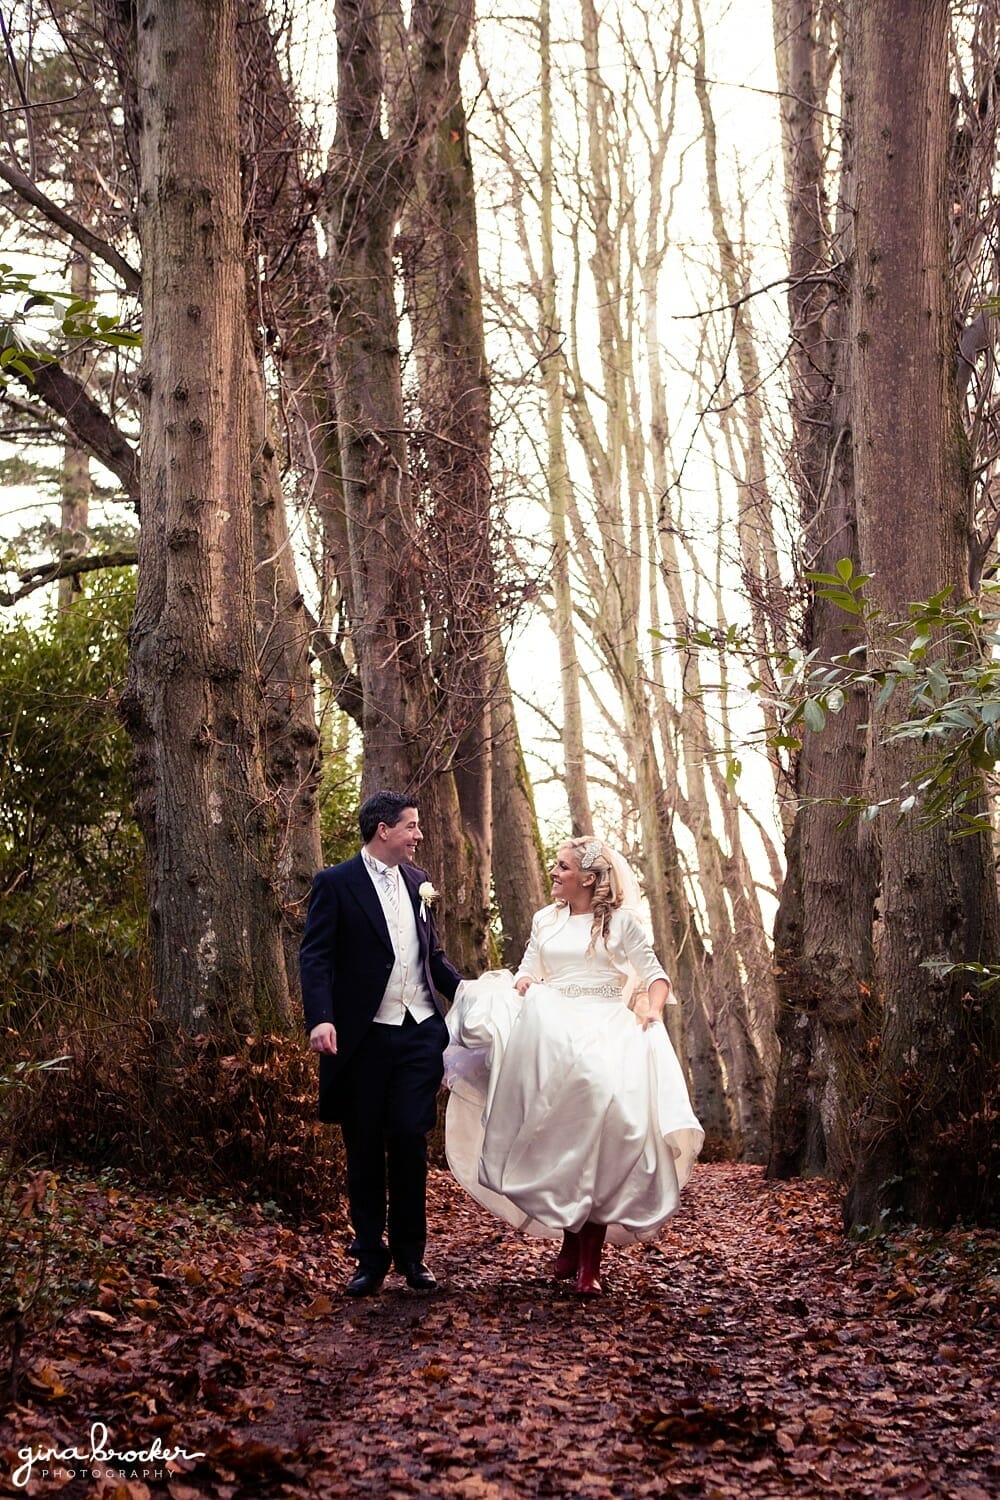 Classic winter wedding bride and groom walking in the woods